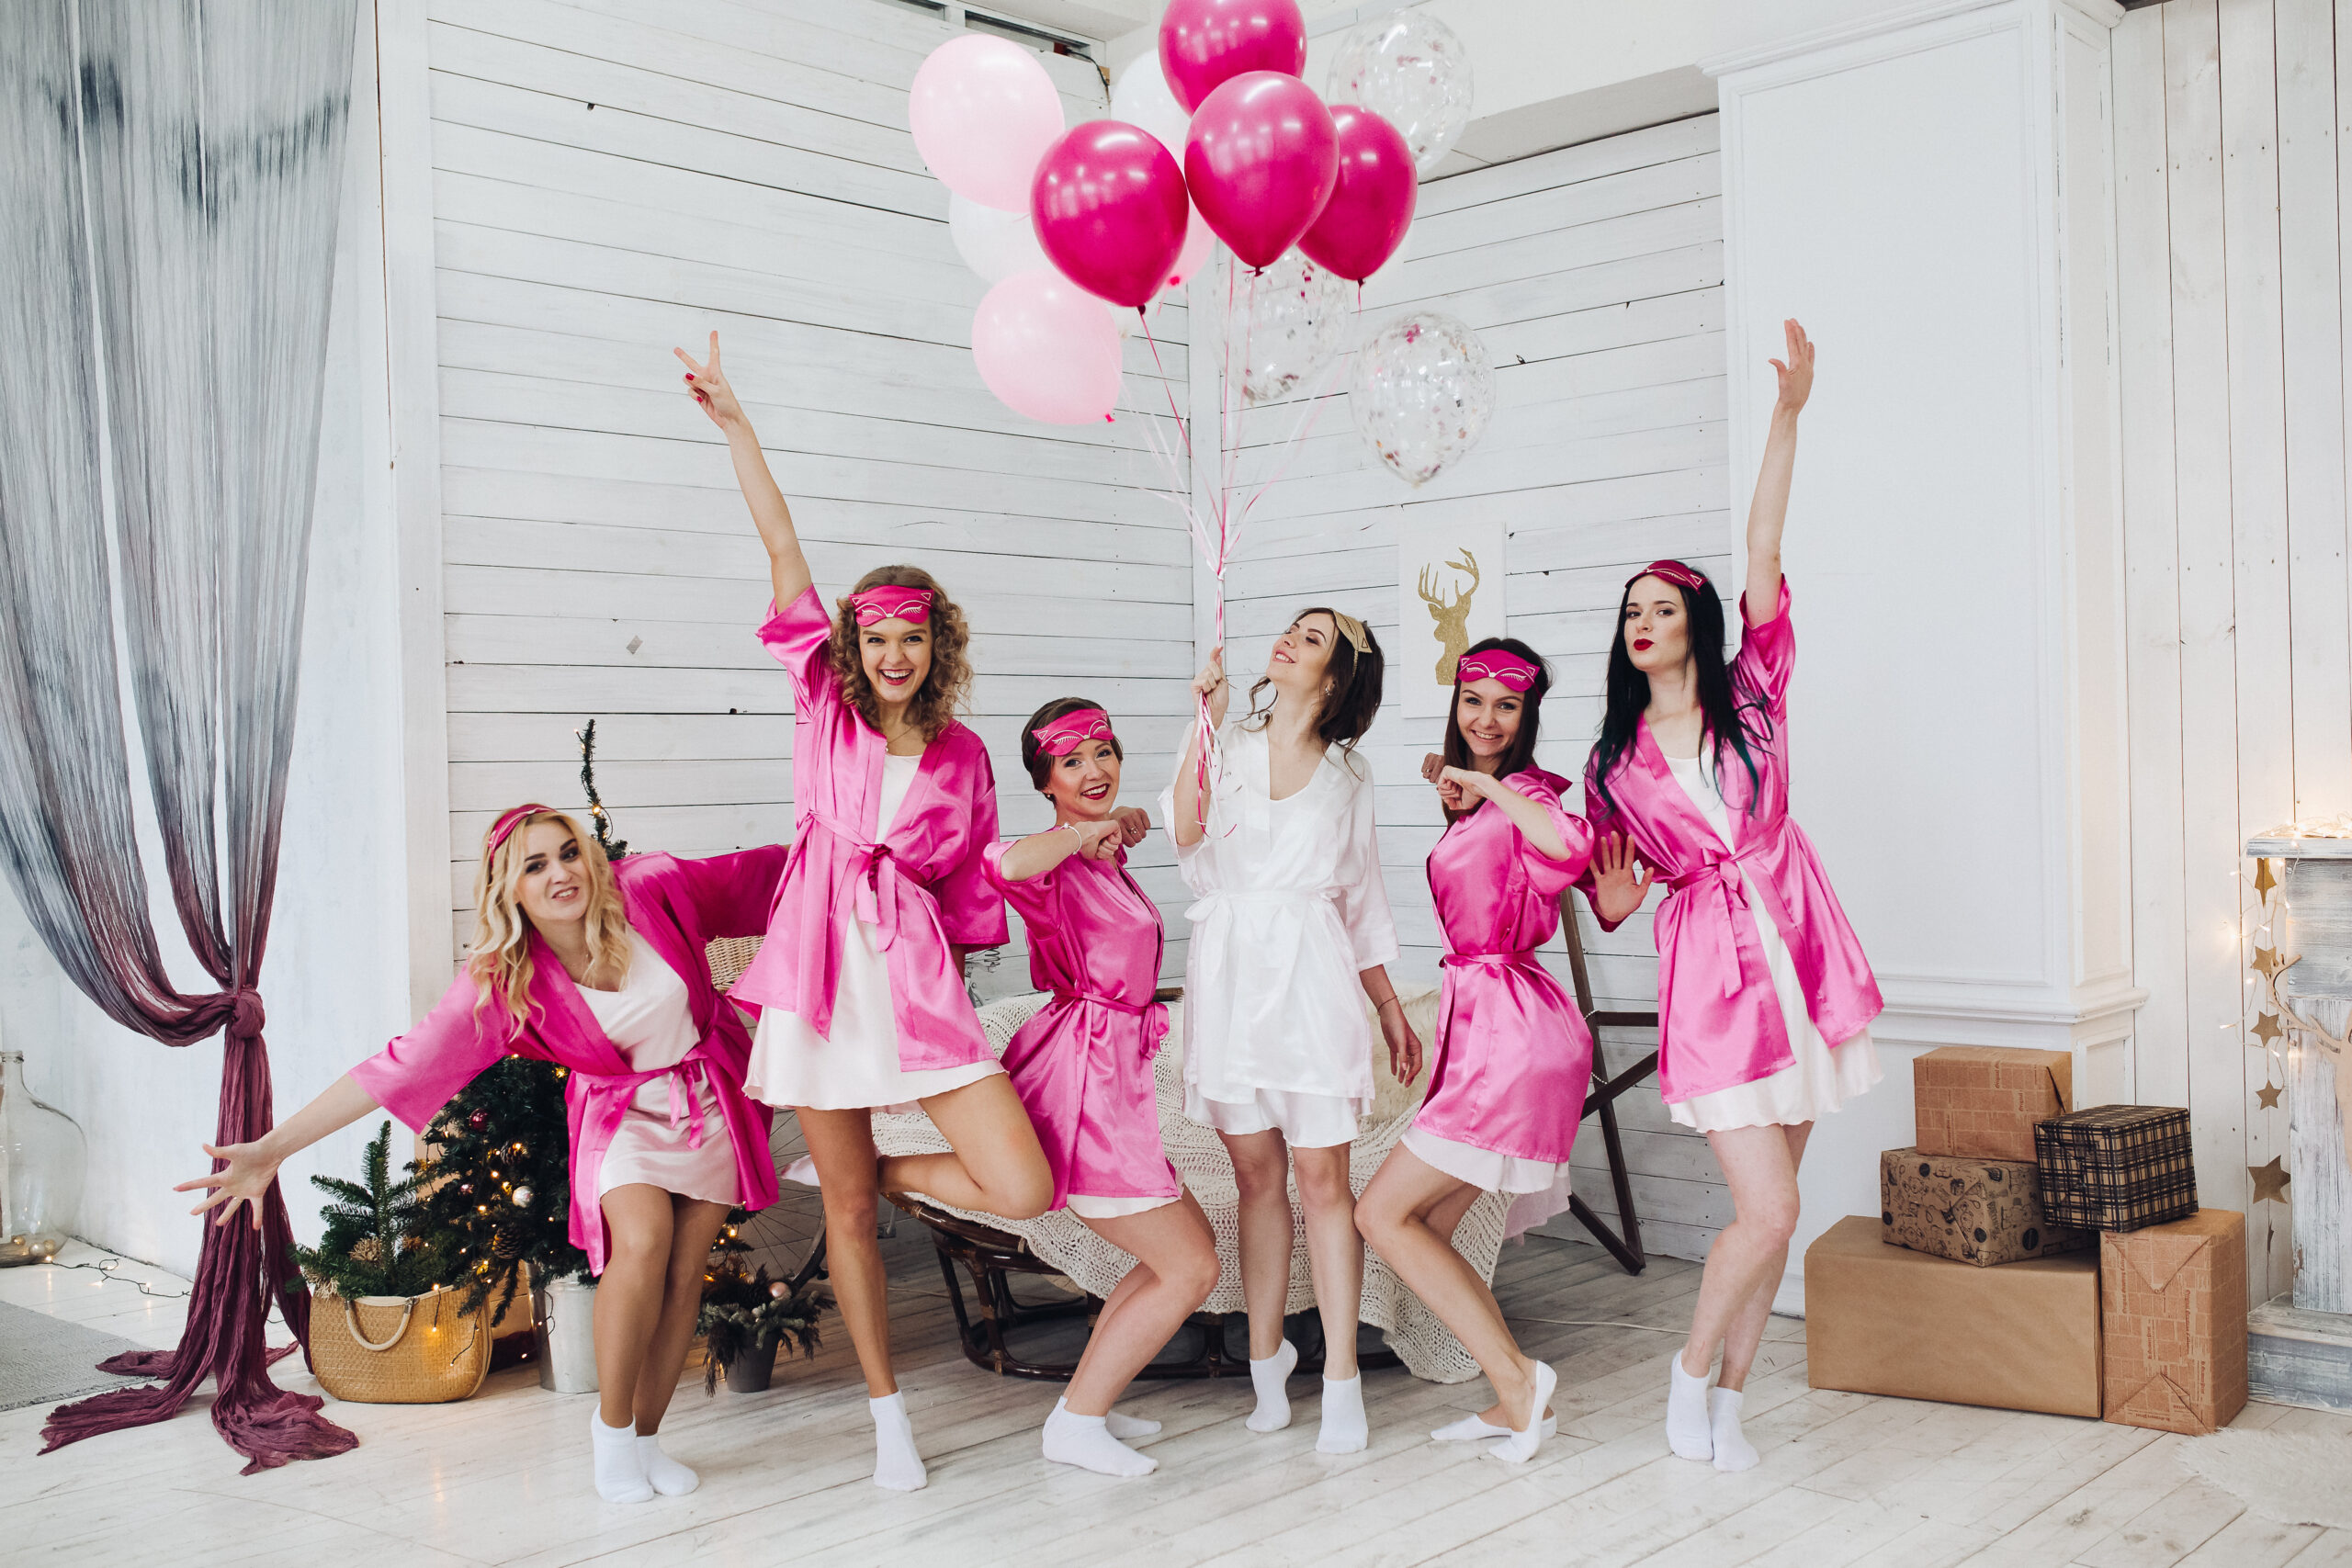 Planning a Memorable Bachelorette Party: A Step-by-Step Guide